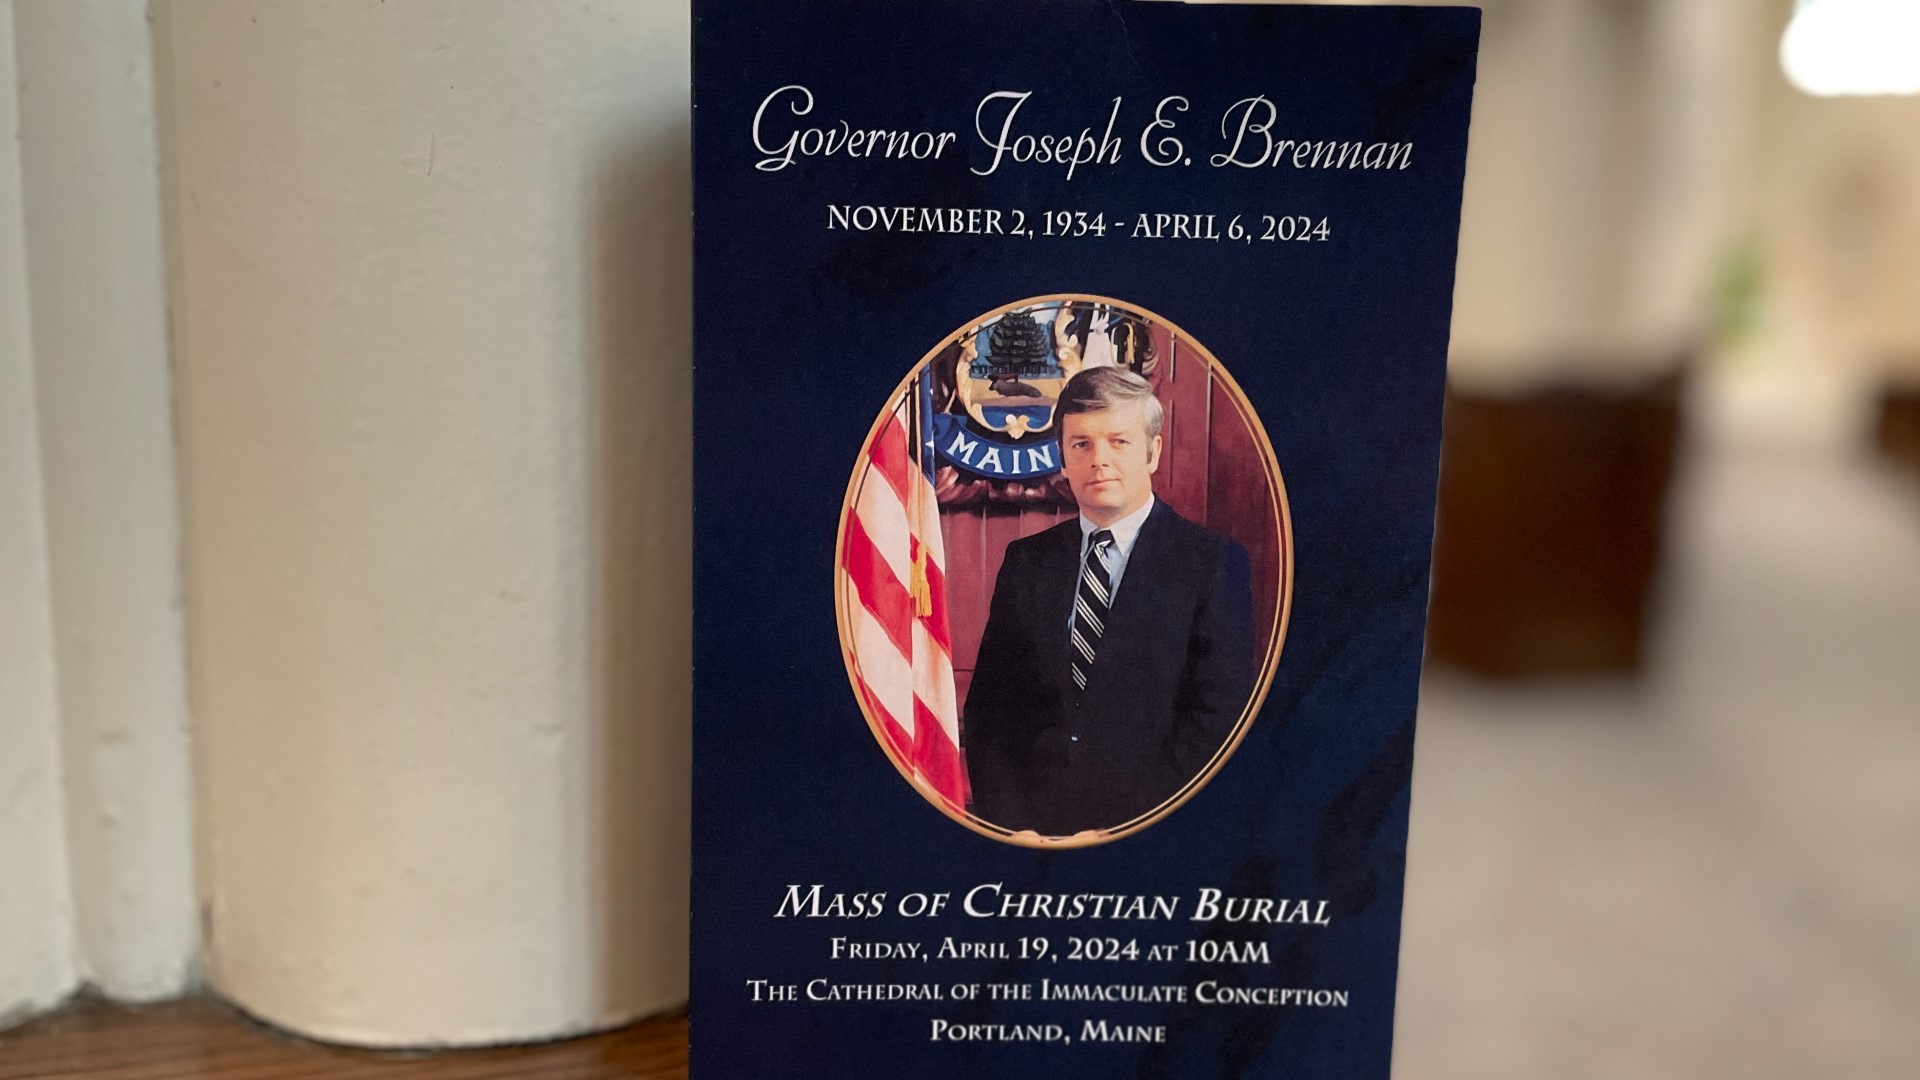 A funeral service was held for Brennan at the Cathedral of the Immaculate Conception in his home city of Portland.